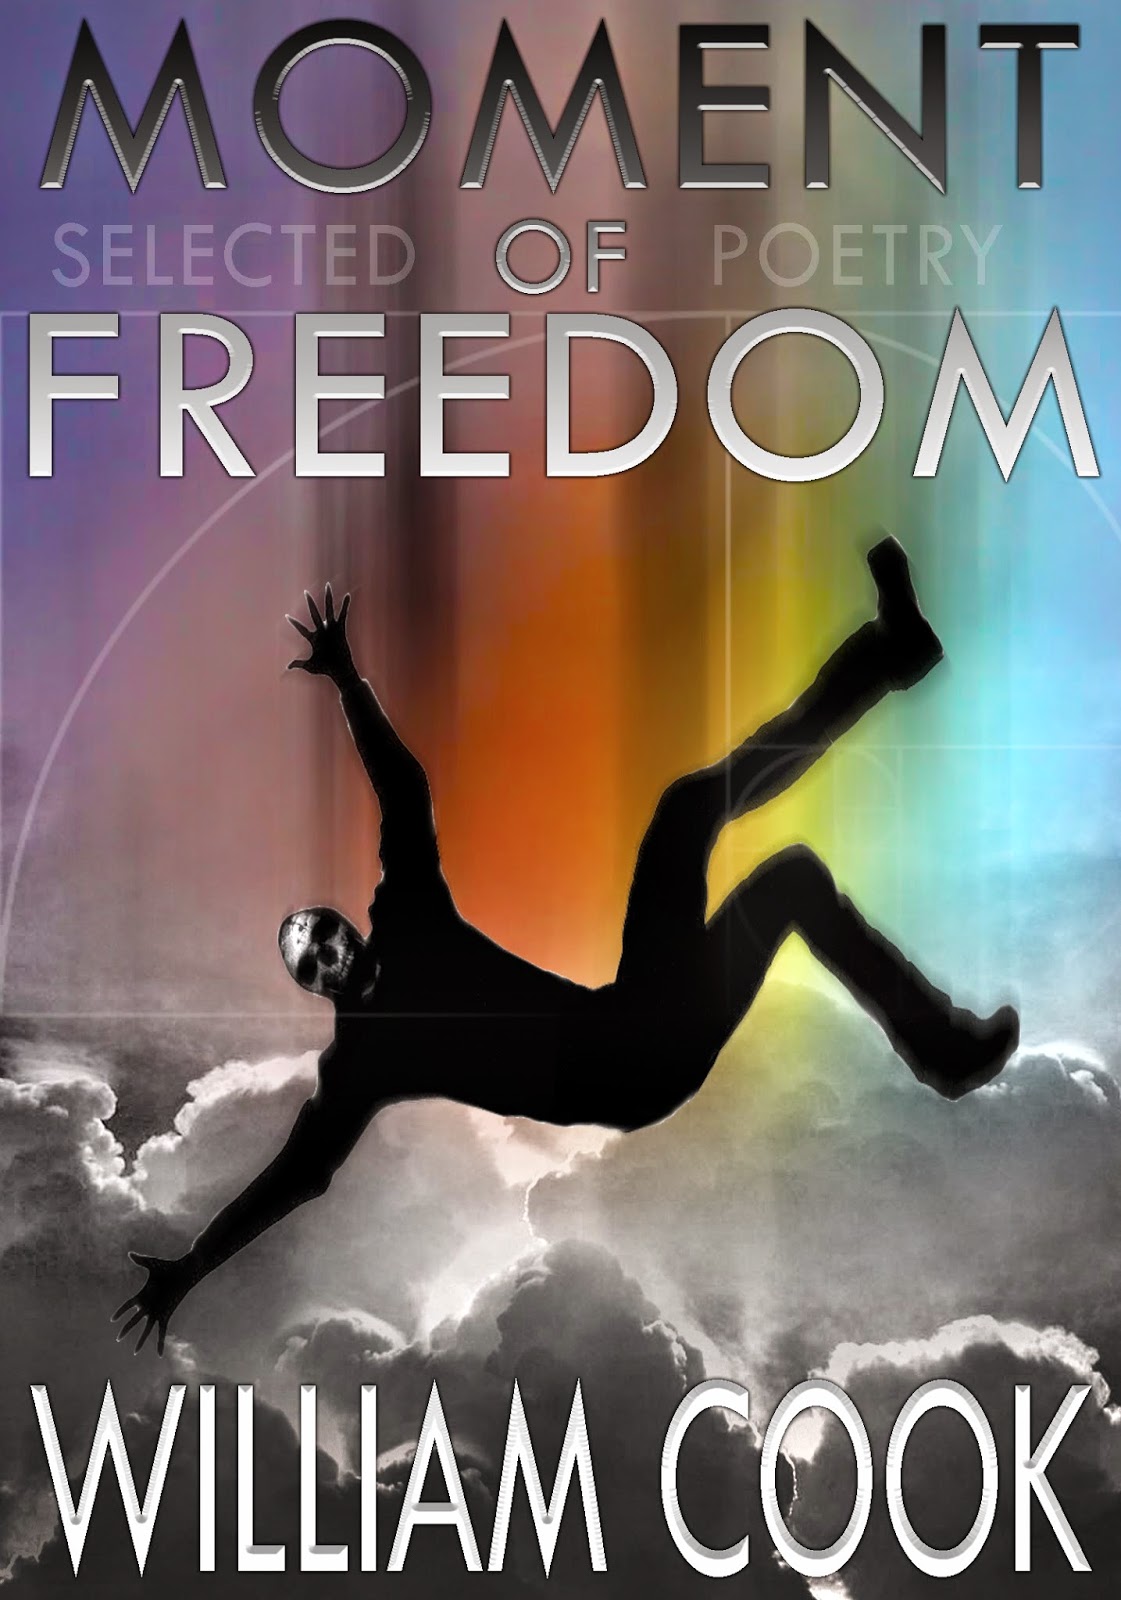 http://www.amazon.com/Moment-Freedom-Selected-Poetry-ebook/dp/B009XZI7LC/ref=la_B003PA513I_1_7?ie=UTF8&qid=1352249533&sr=1-7